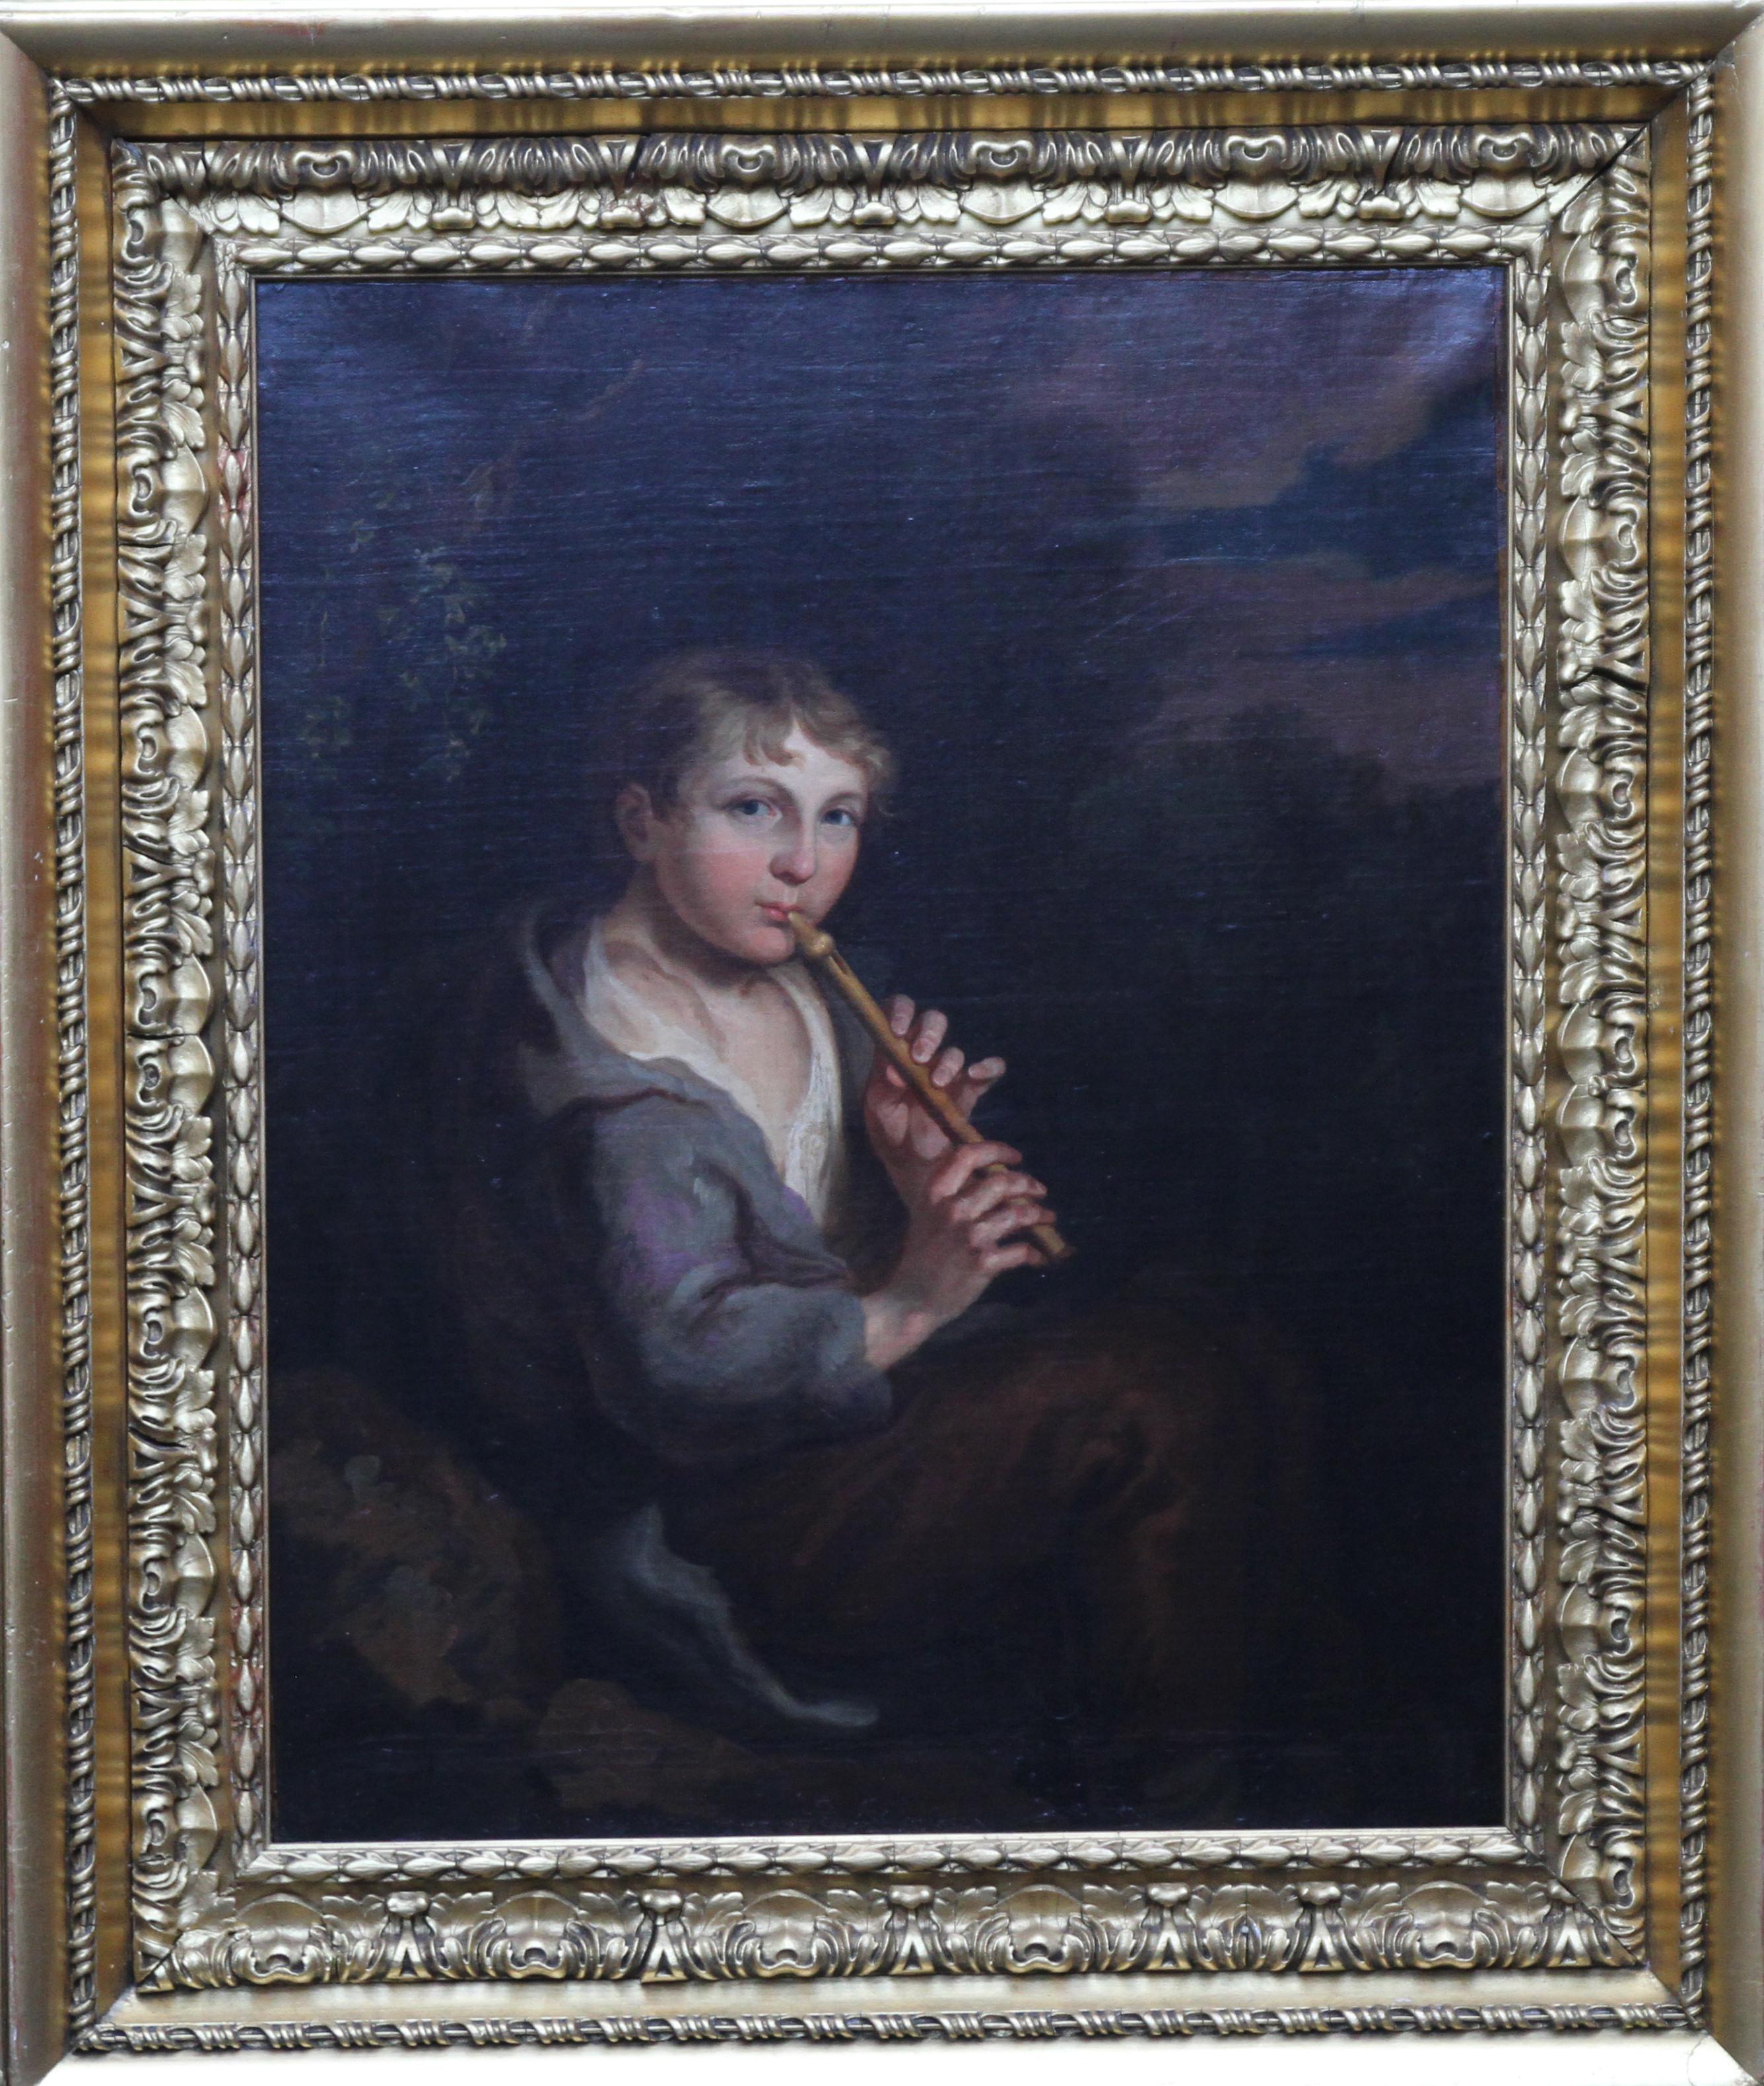 Thomas Barker of Bath (att.)  Portrait Painting - Portrait of Boy Playing a Flute - 18th/19th century art Old Master oil painting 